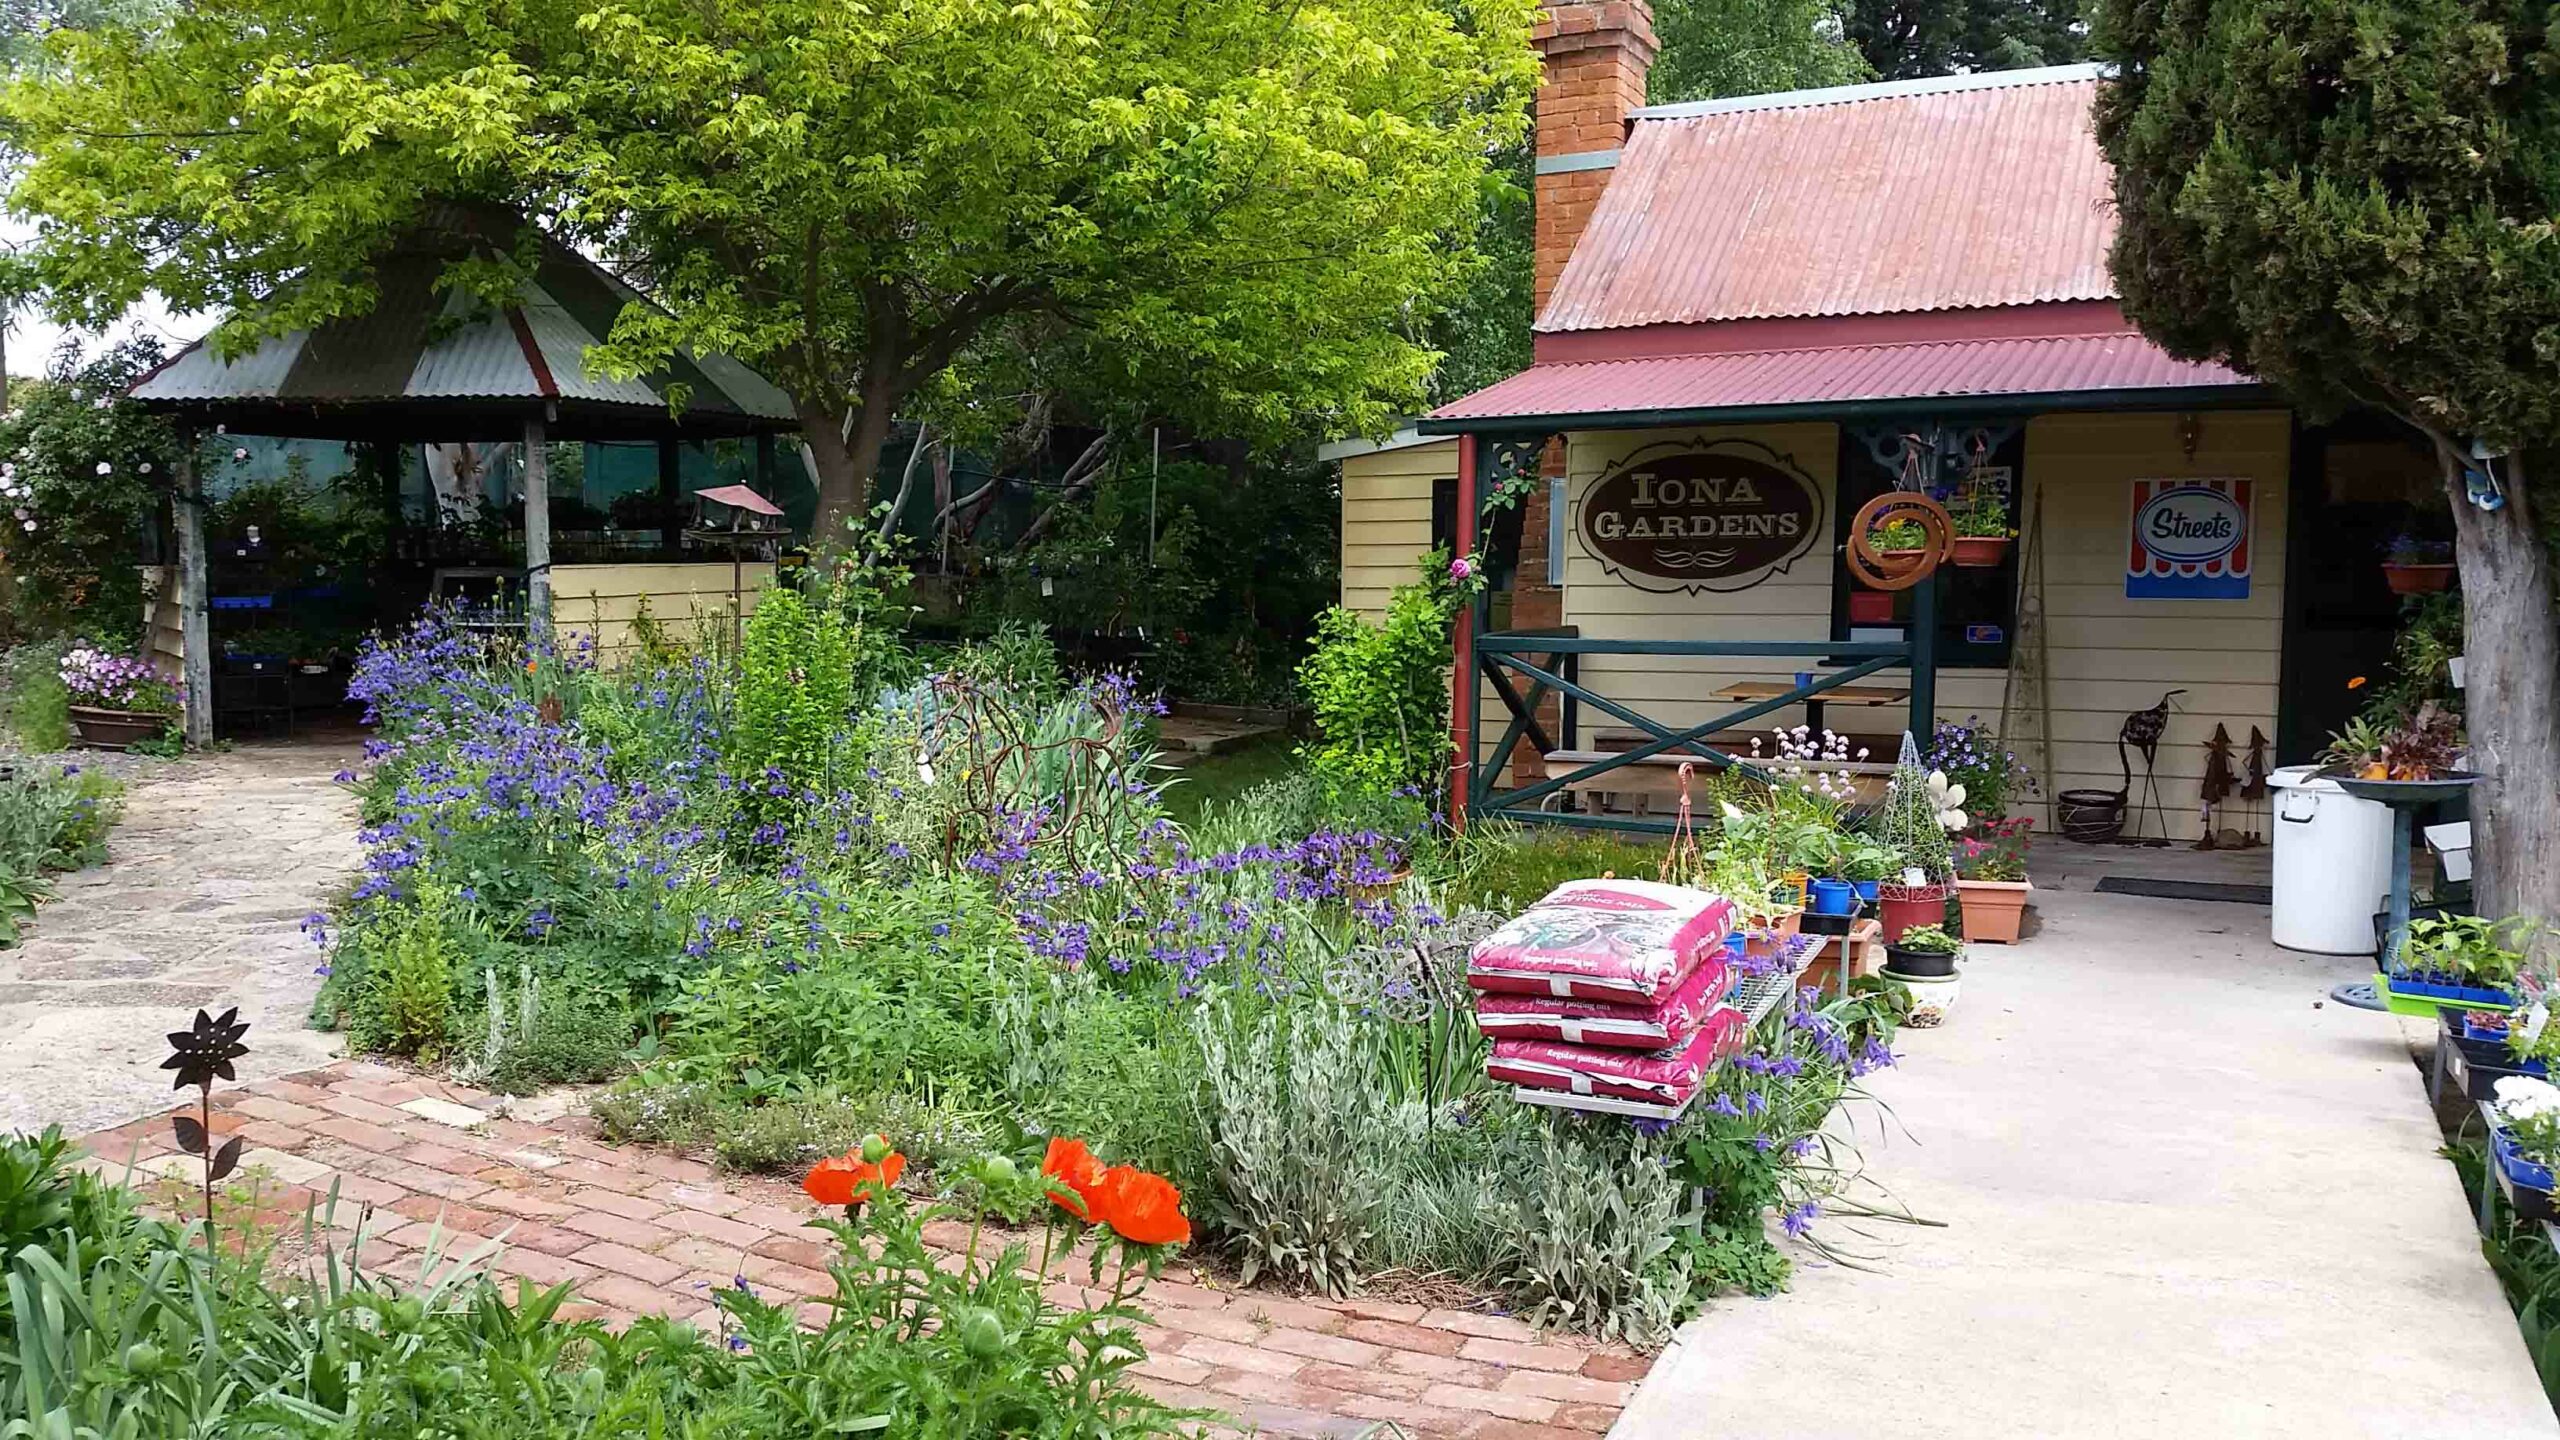 The gardens and exterior of Iona GardensCafe and Nursery